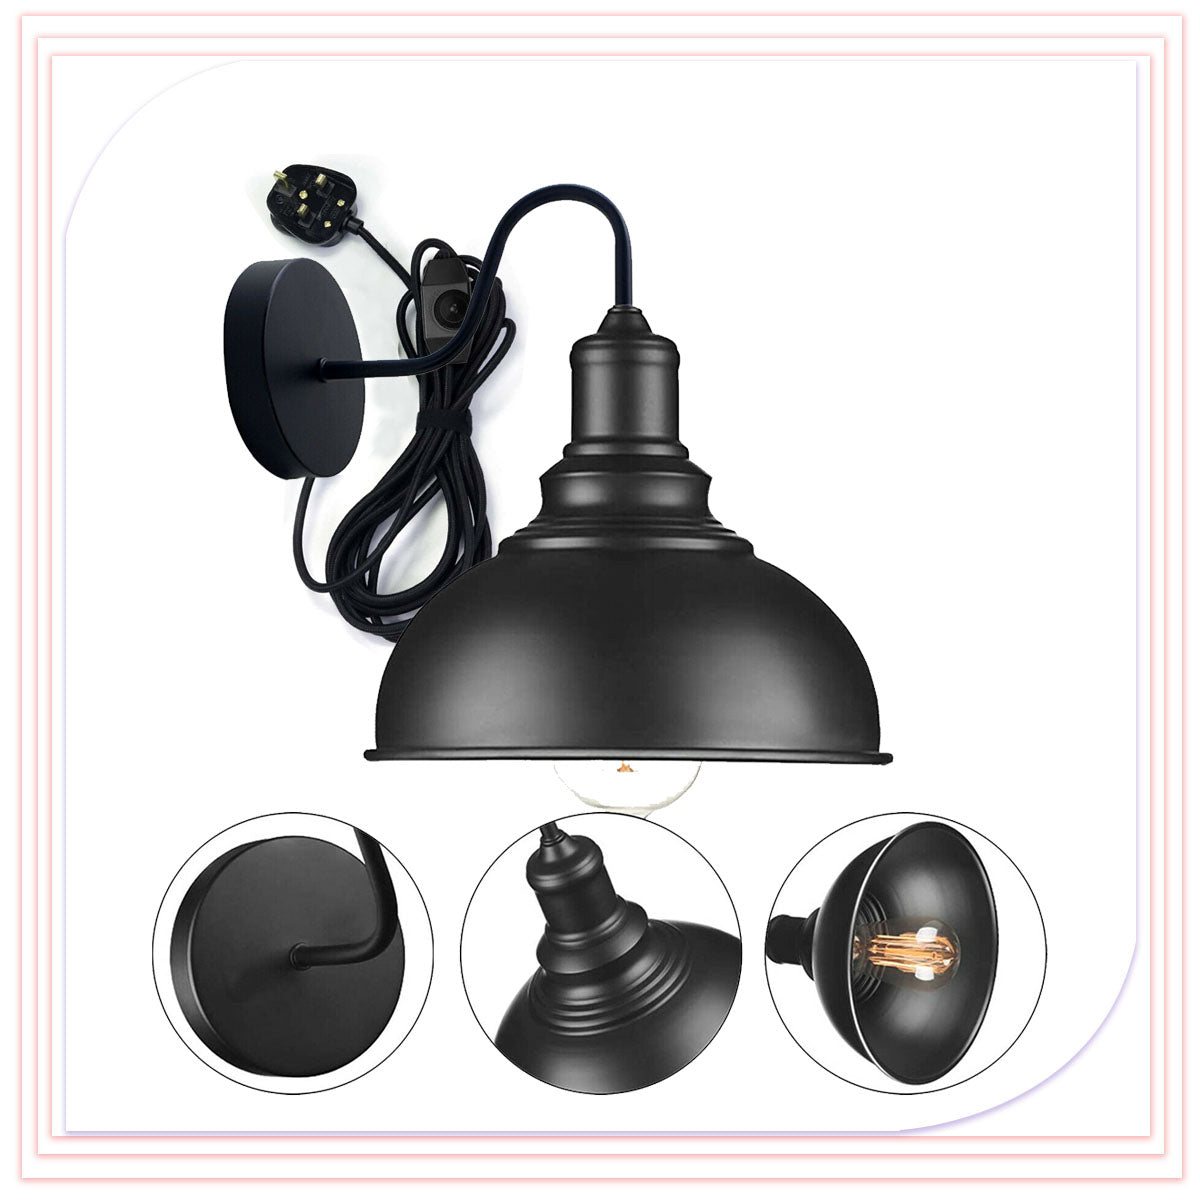 Vintage Black E27 Lamp Holder Wall Sconces Swan Neck Dimmable Switch-Structure image